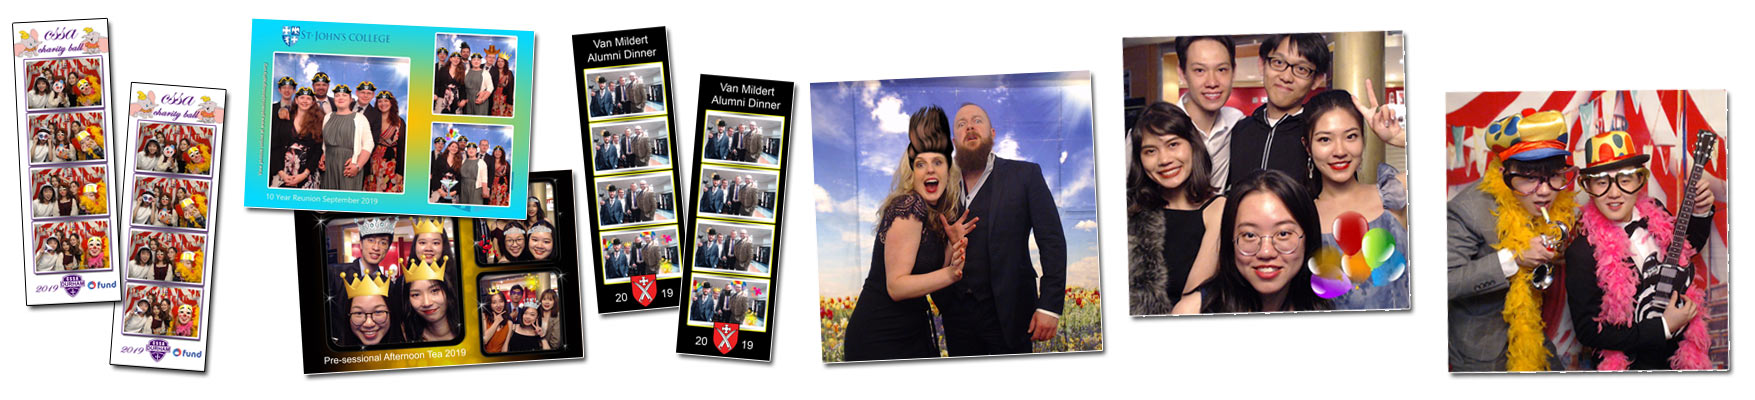 Selfie Booth example photos and printouts